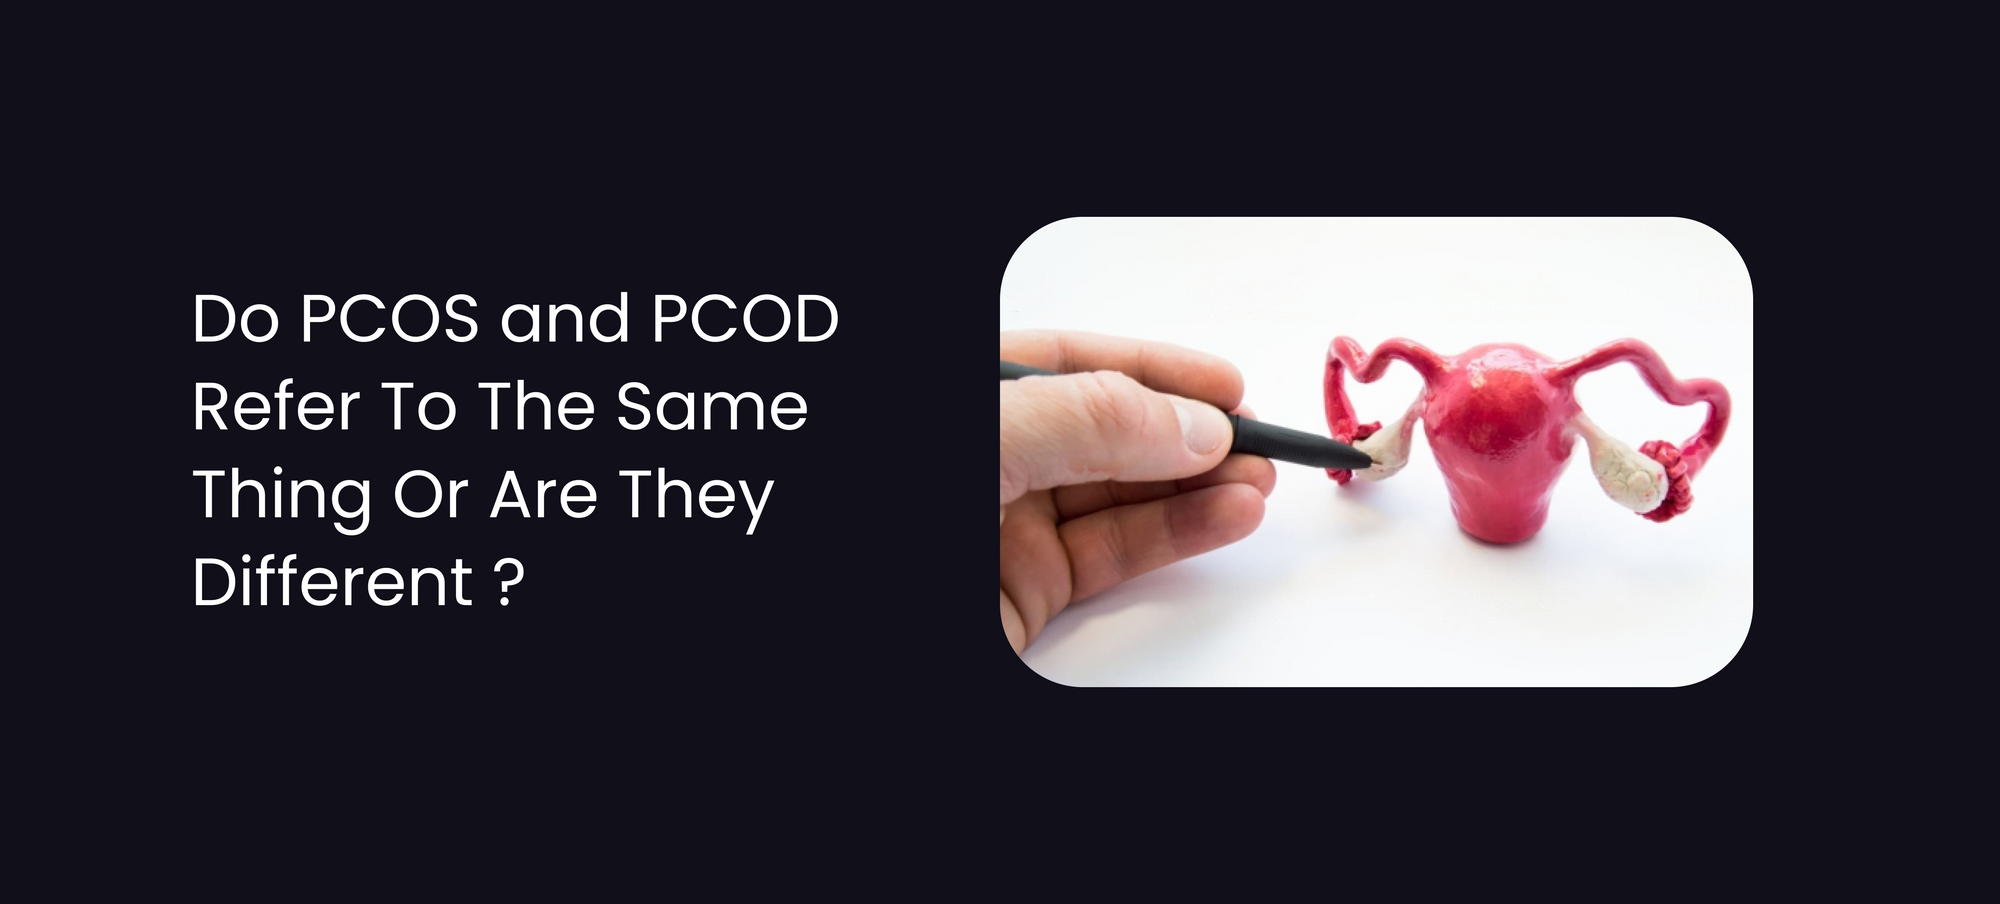 Do PCOS and PCOD Refer To The Same Thing Or Are They Different?